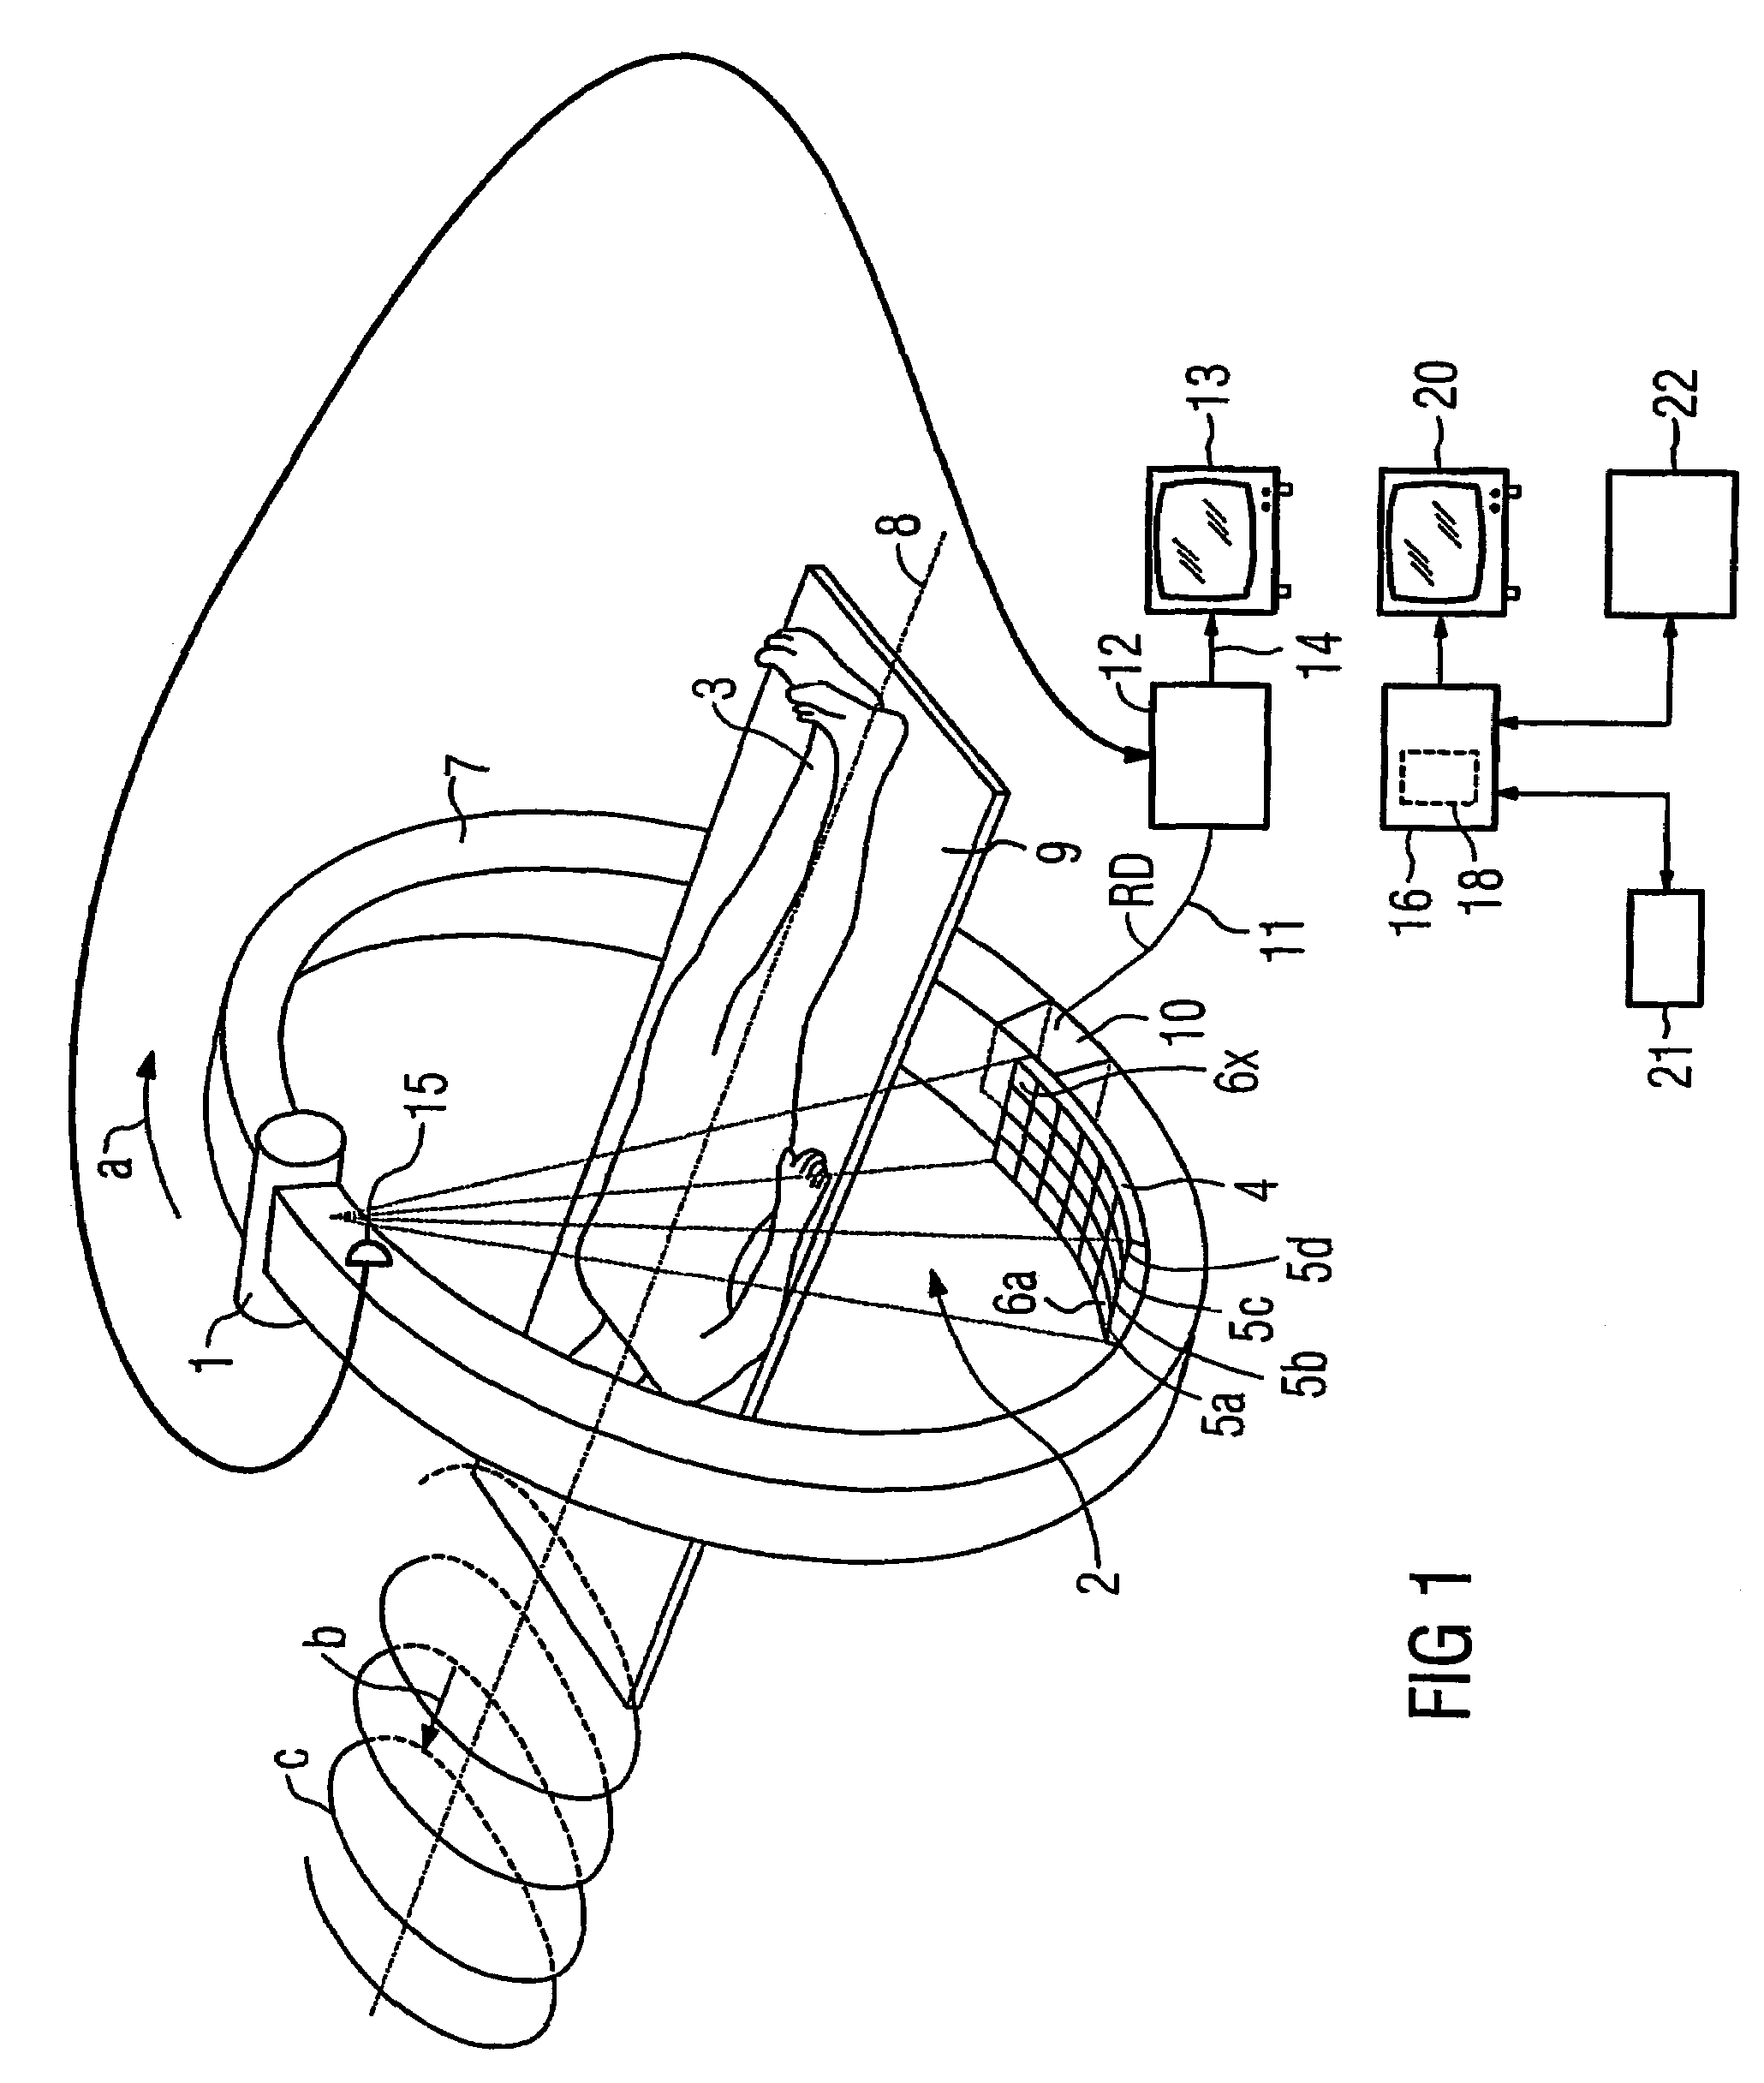 Computer tomography unit with a data recording system